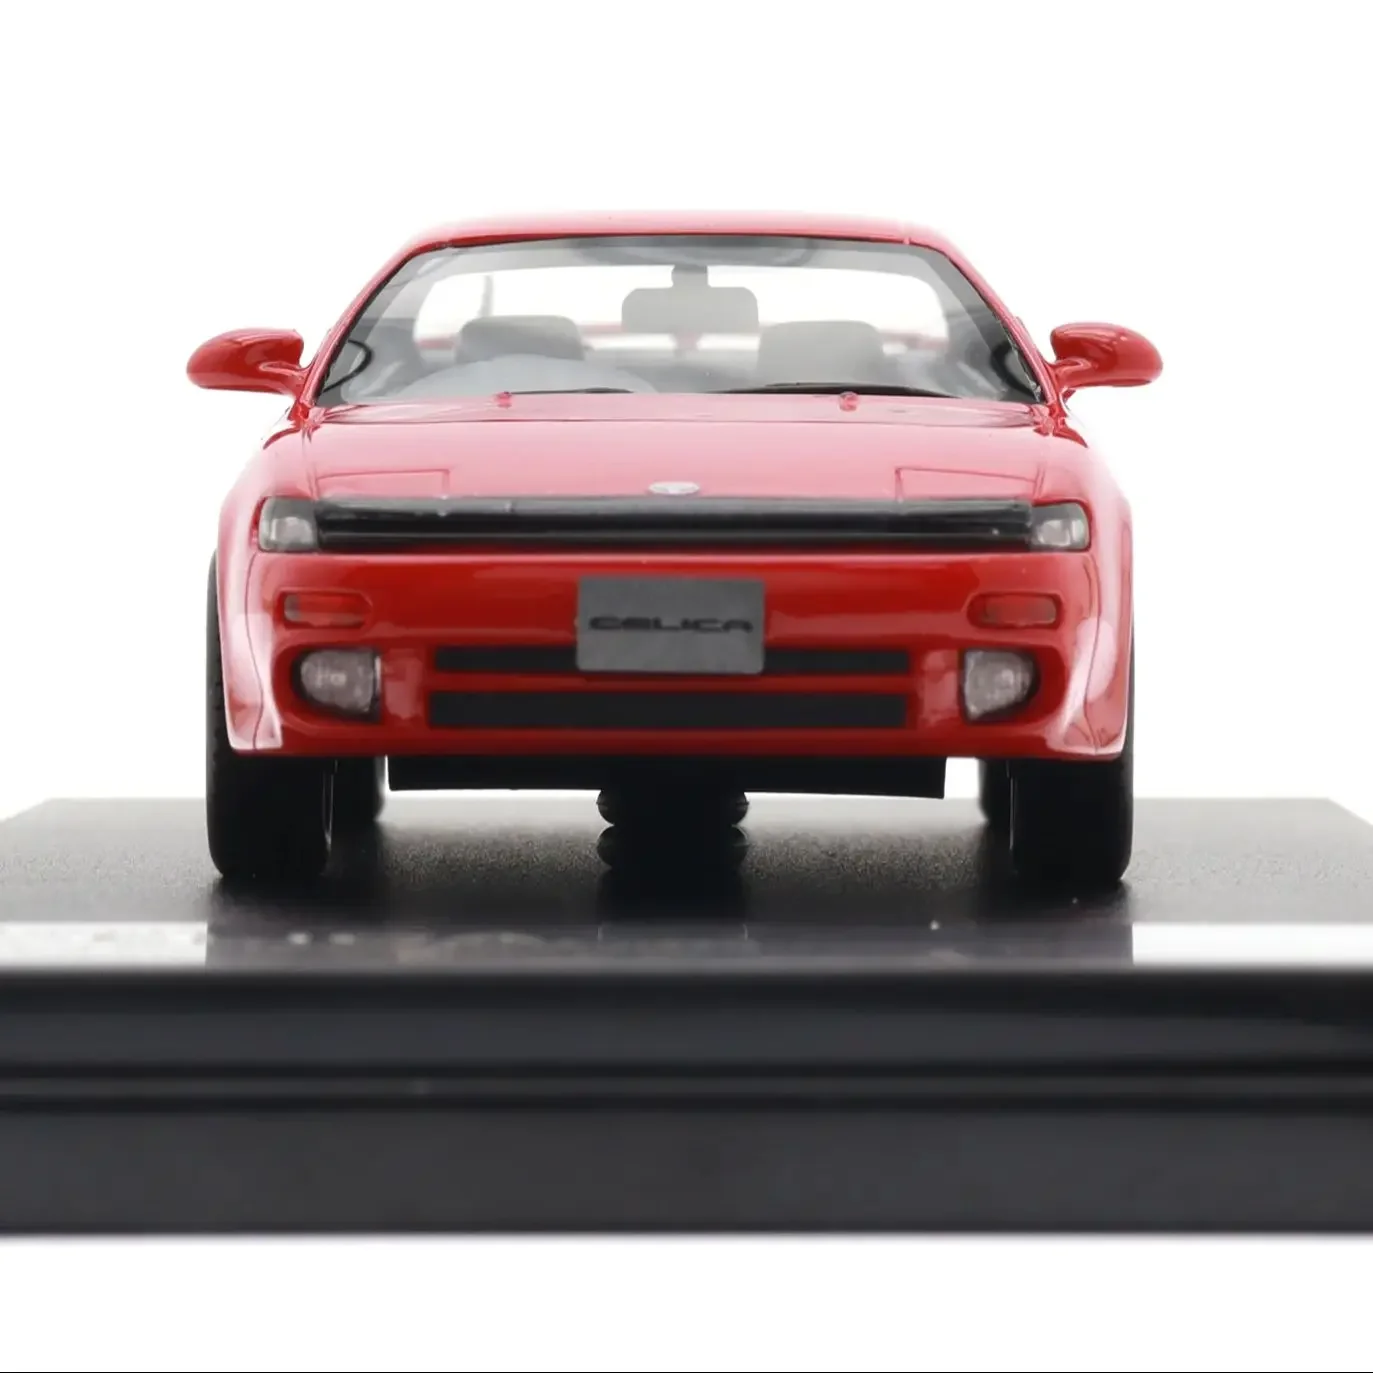 

1/43 Scale Resin Collector's Model For J-43555 Toyota CELICA GT R 2000 TWINCAM 16 1991 Car Model Toy Collection Decoration